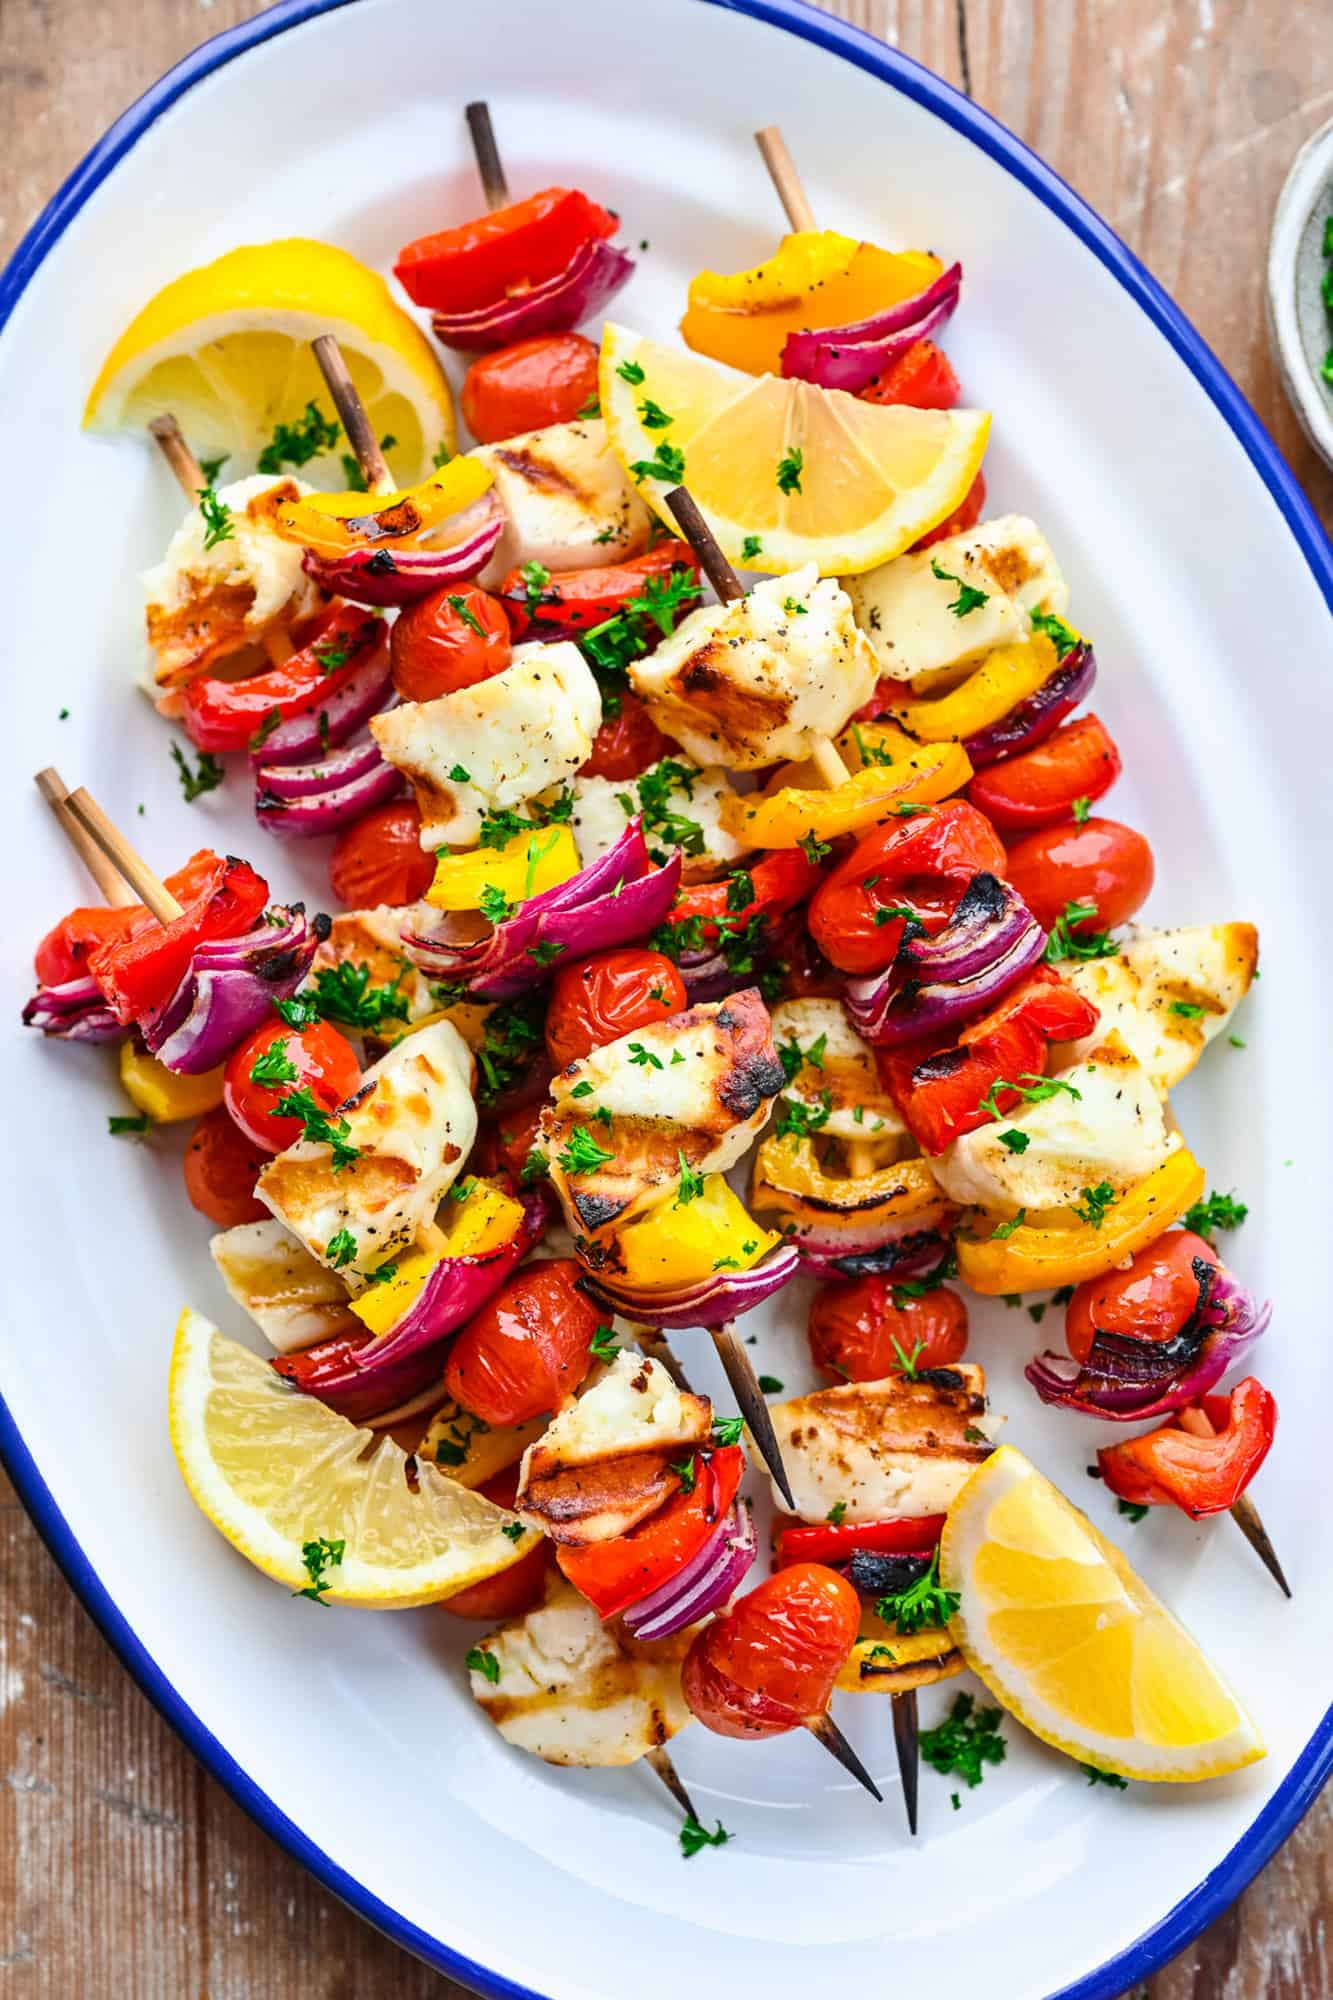 Grilled halloumi kebabs with vegetables and lemon.